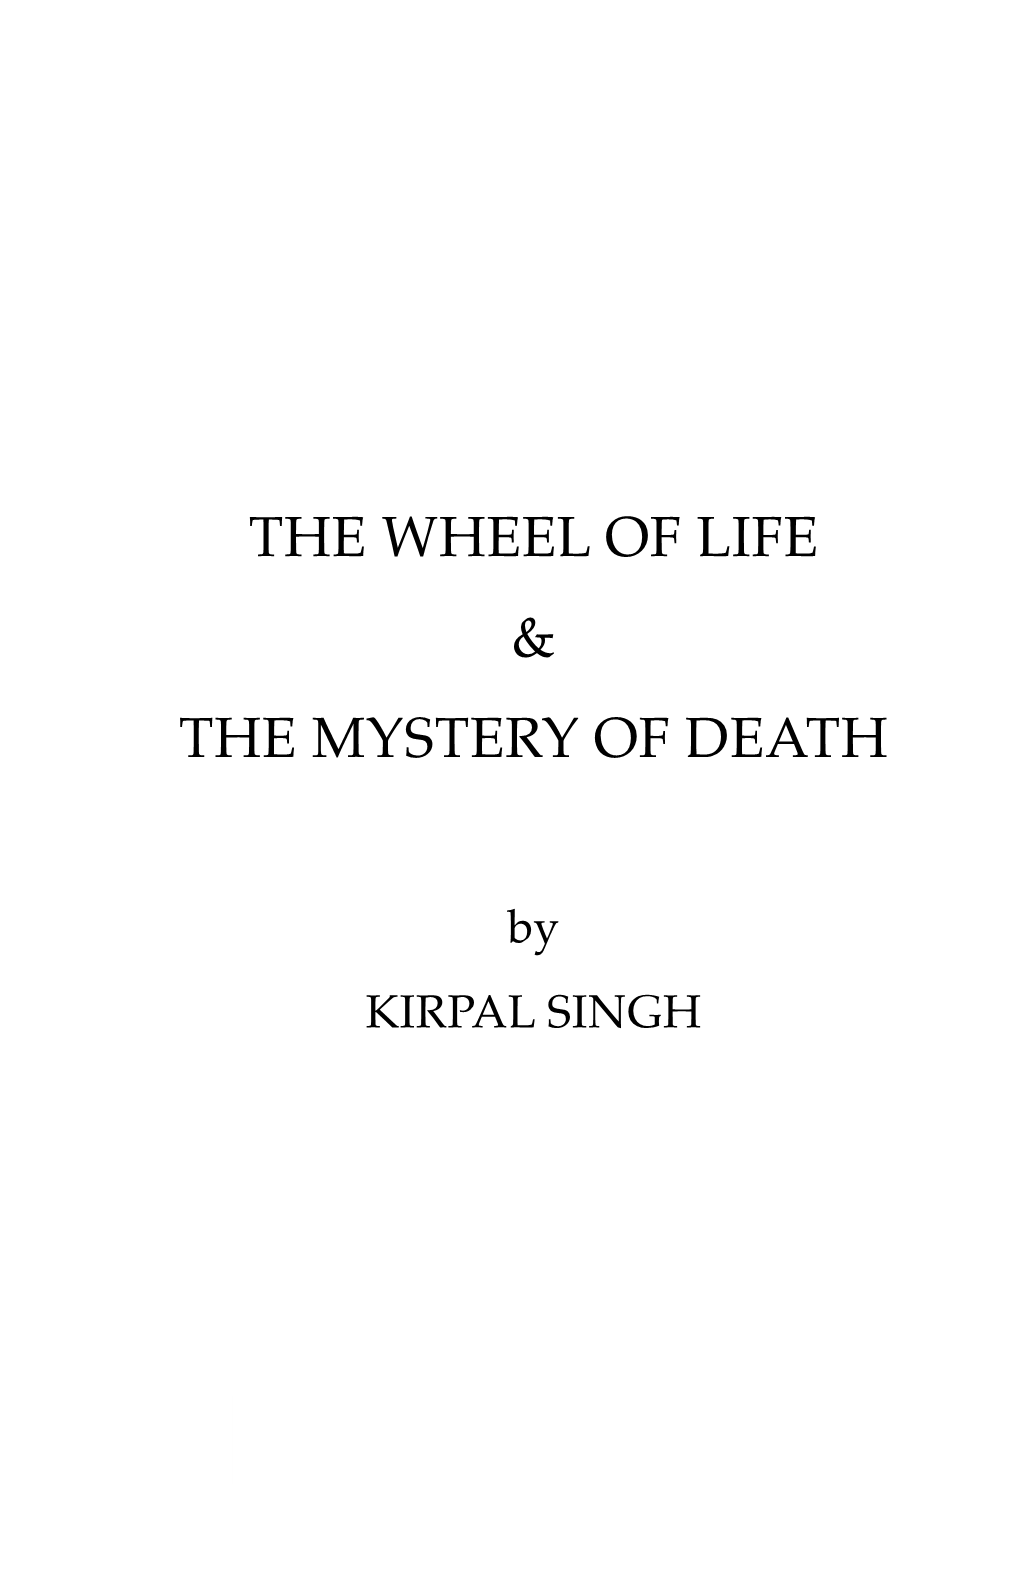 The Wheel of Life & the Mystery of Death